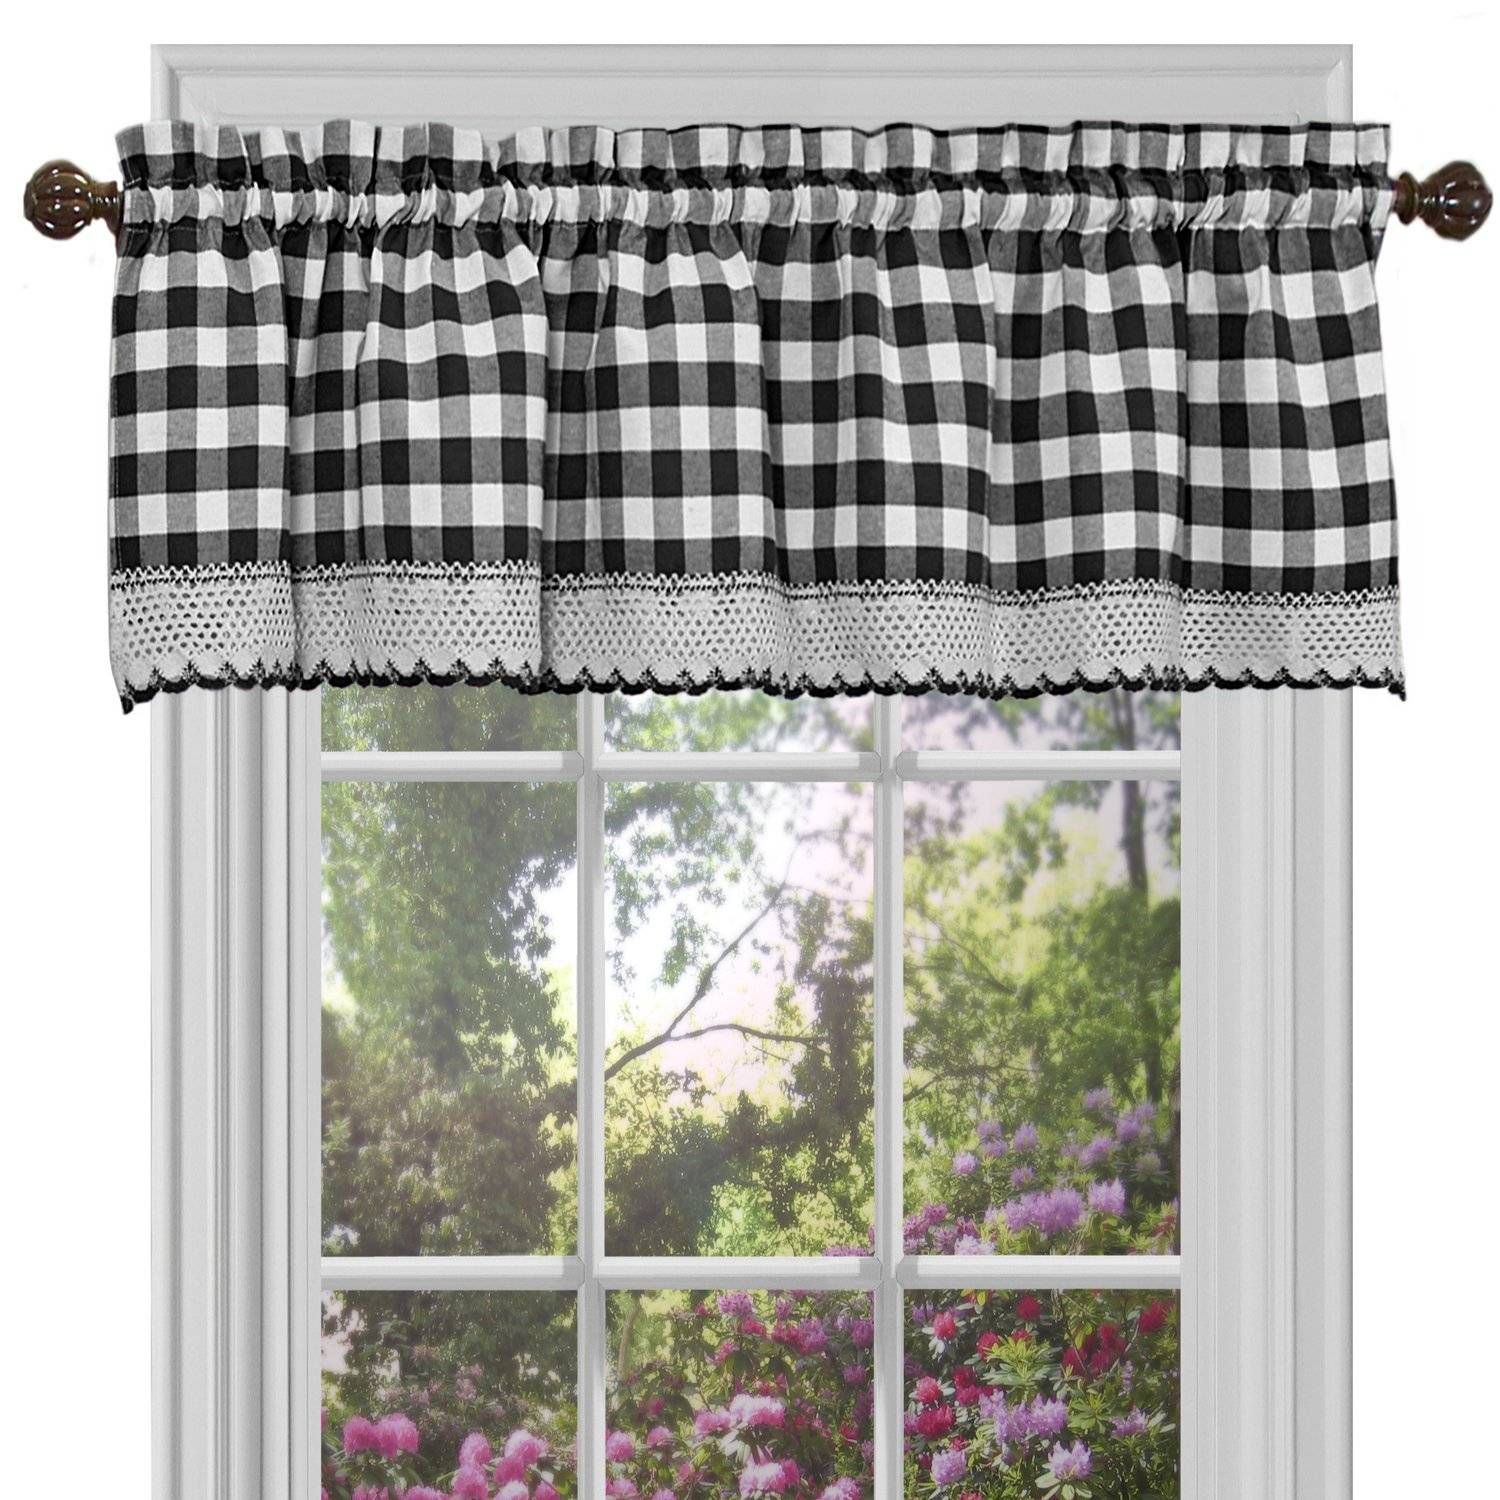 Alluring Black And White Checkered Kitchen Valance Valances Pertaining To Cotton Blend Classic Checkered Decorative Window Curtains (View 9 of 20)